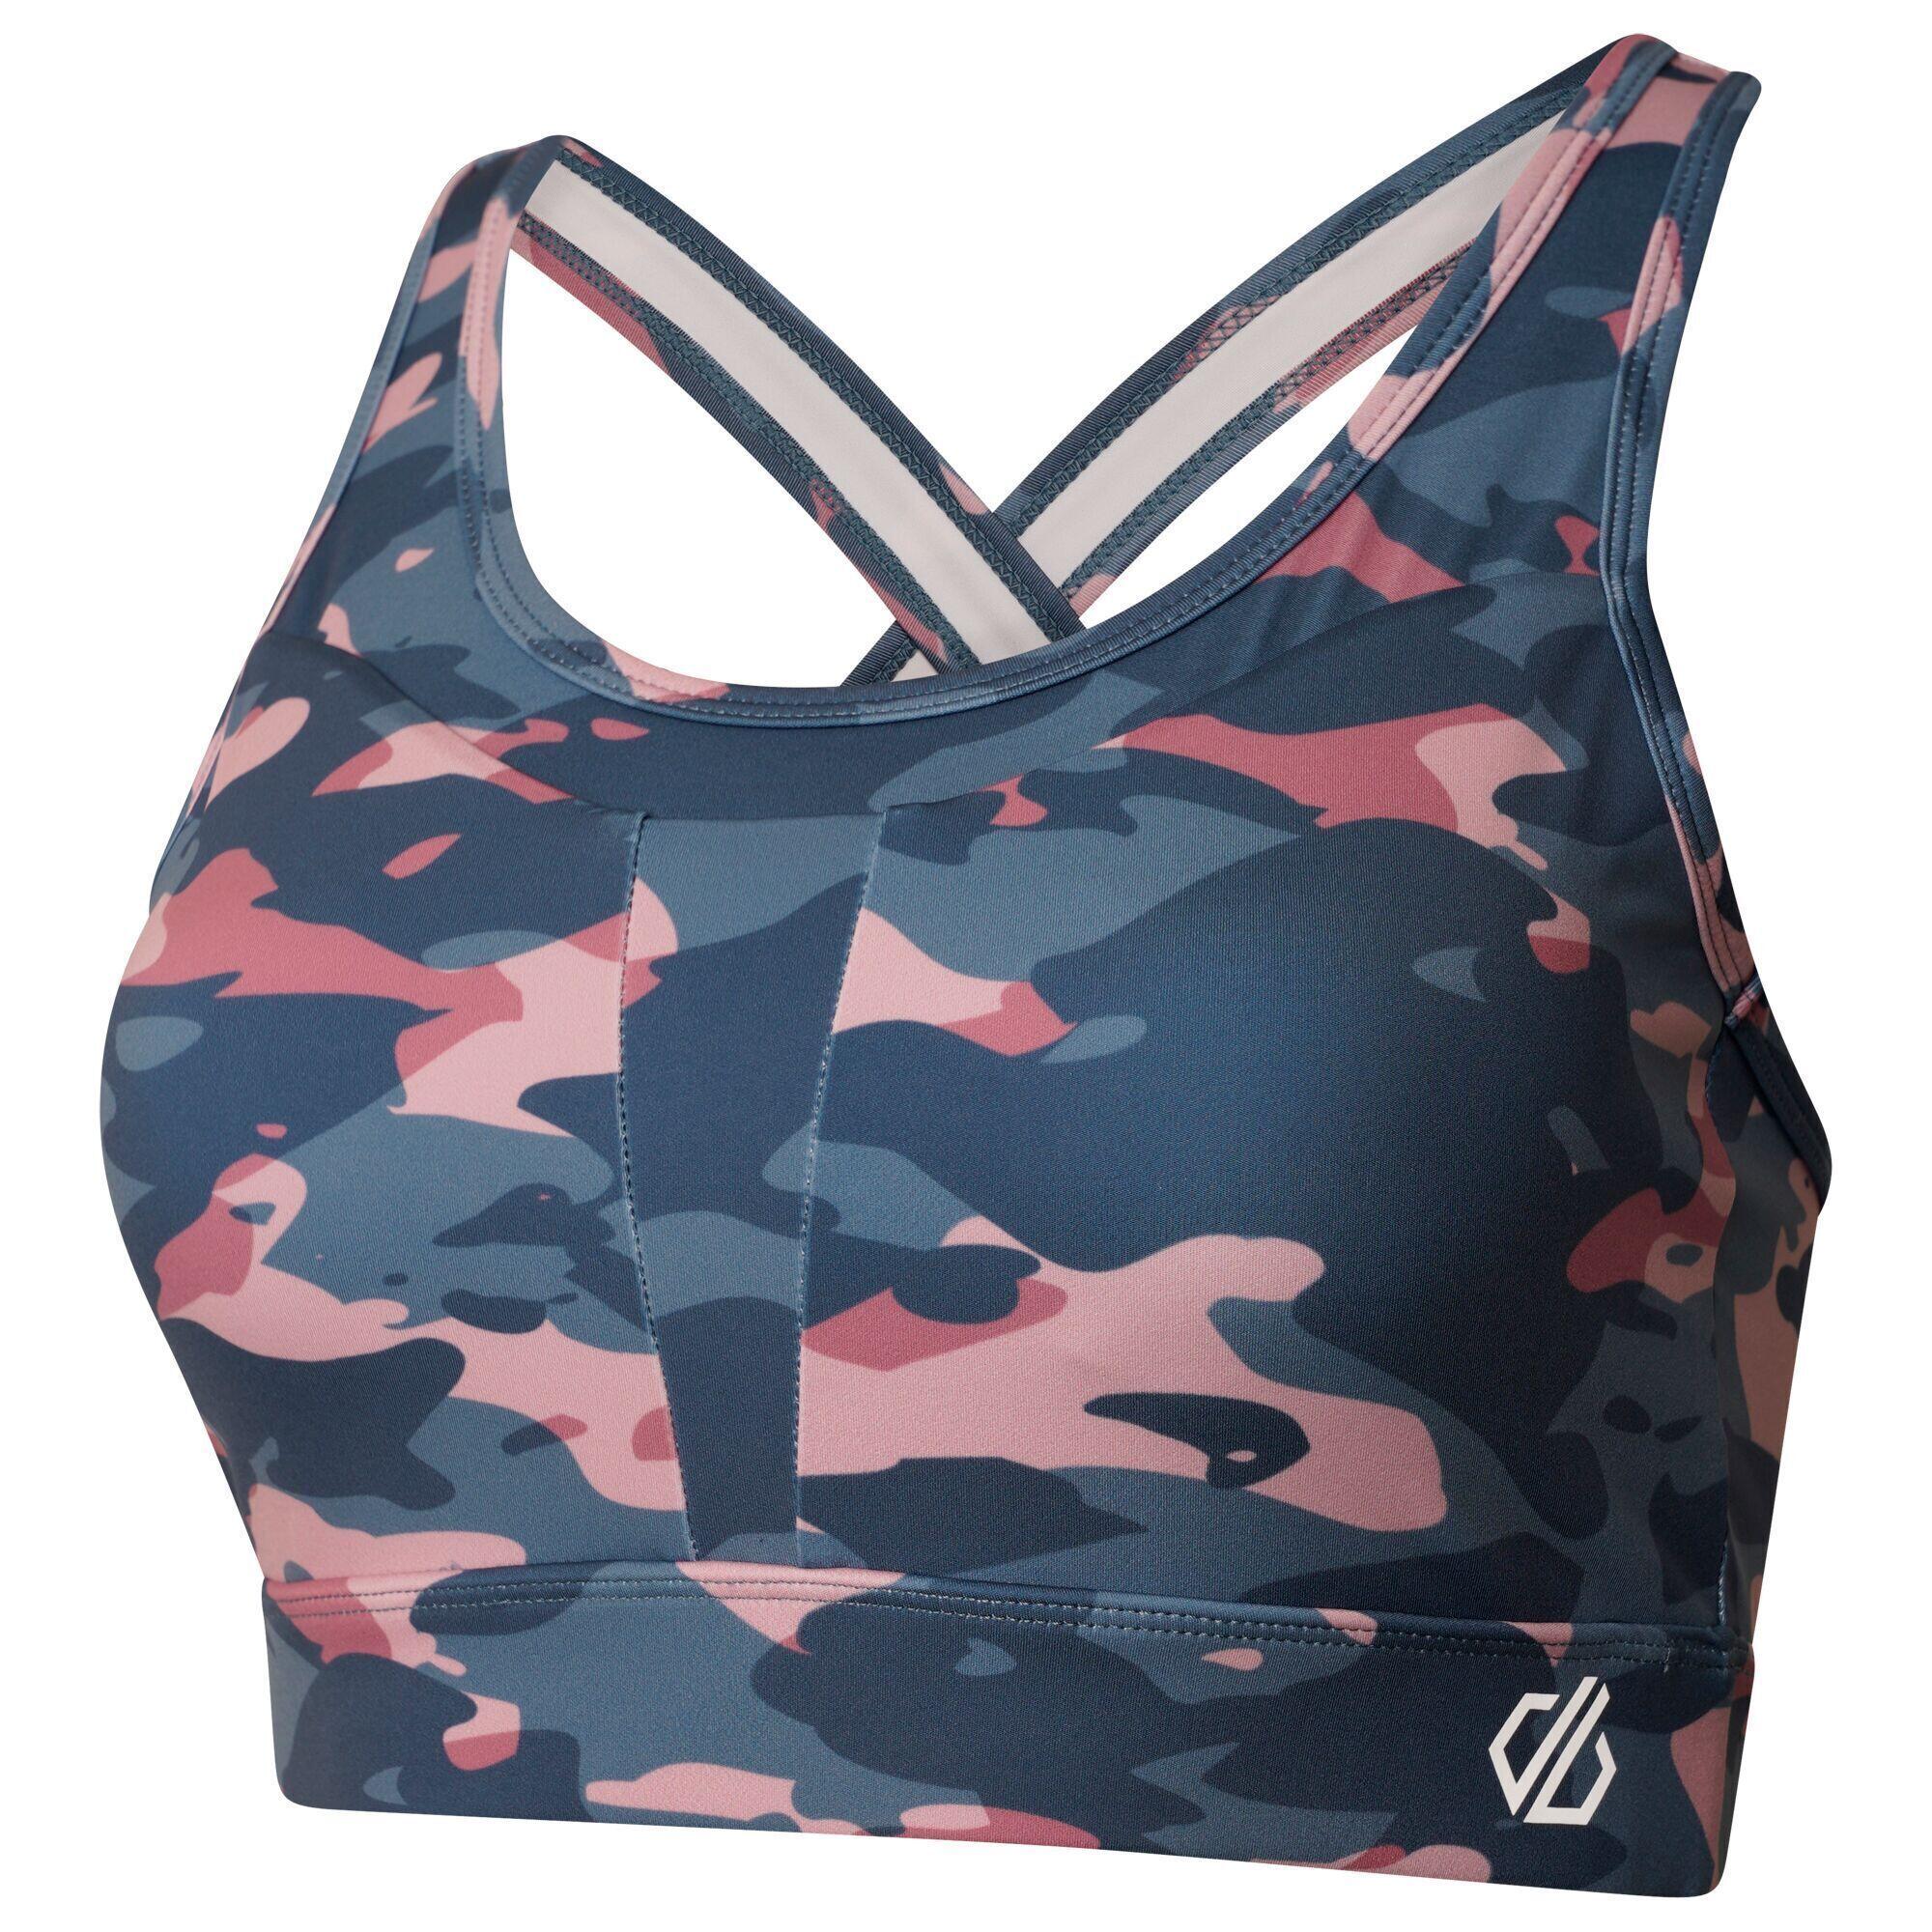 Womens/Ladies The Laura Whitmore Edit Mantra Camo Recycled Sports Bra (Powder 3/5